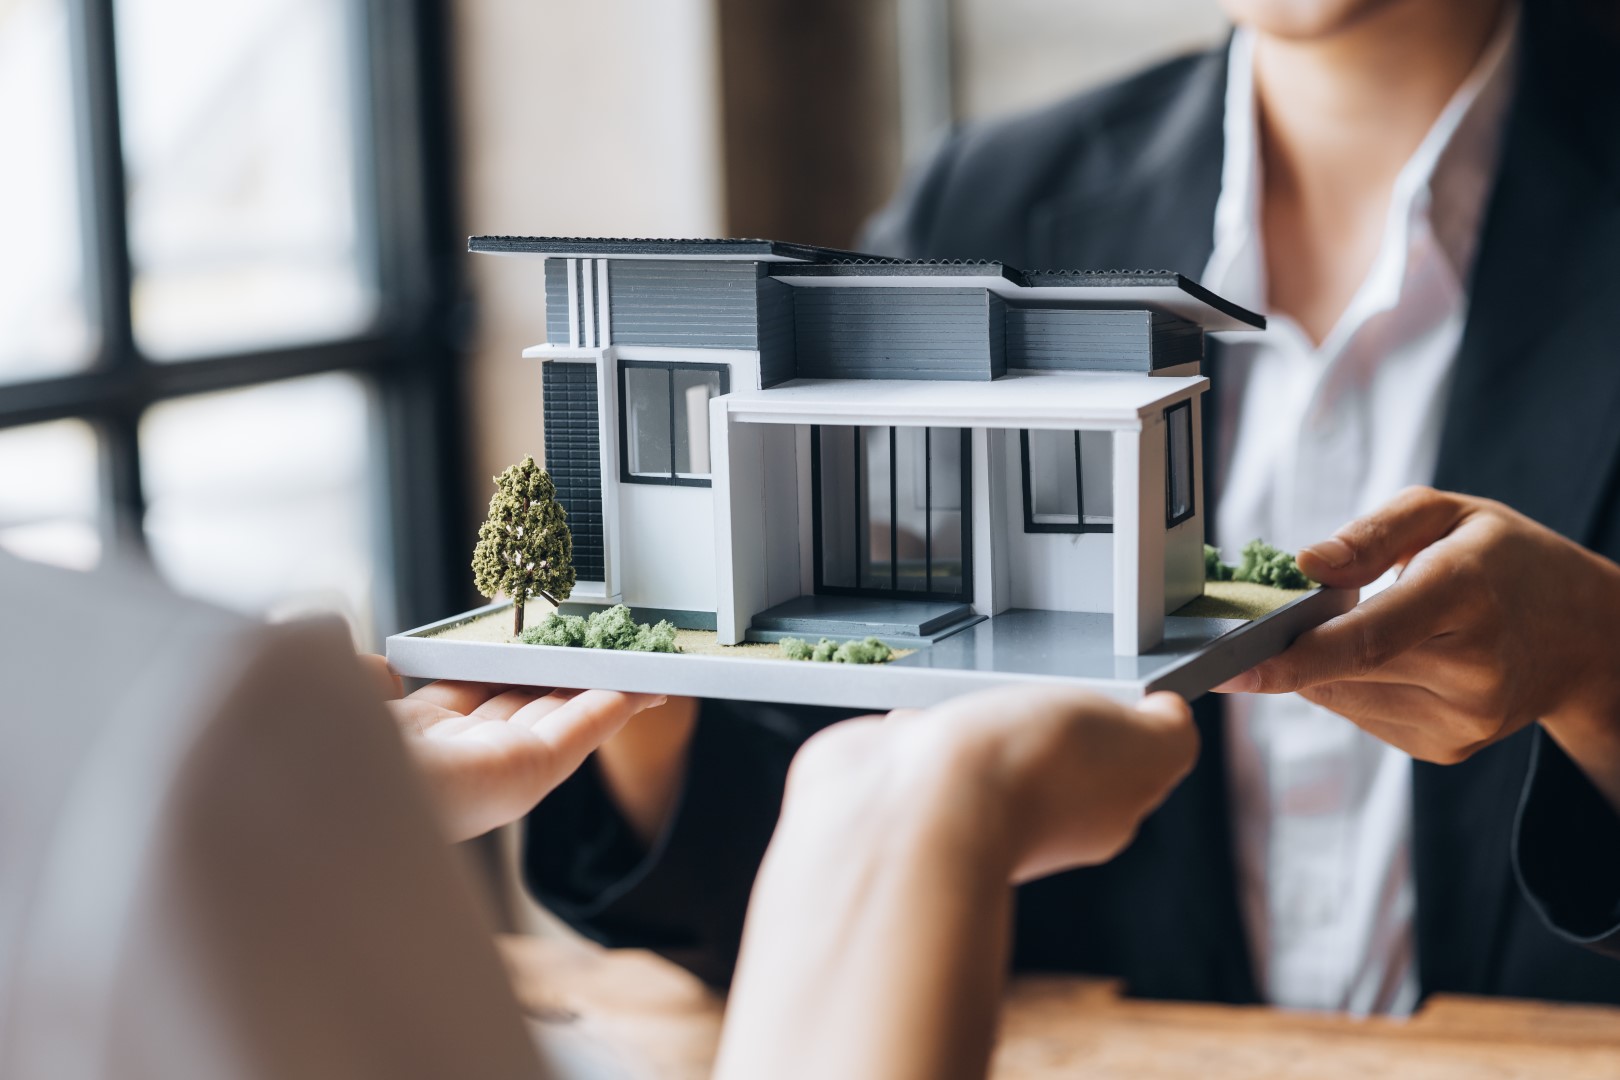 Real Estate Agents Are Carrying A Housing Model Of 2023 01 31 01 02 19 Utc